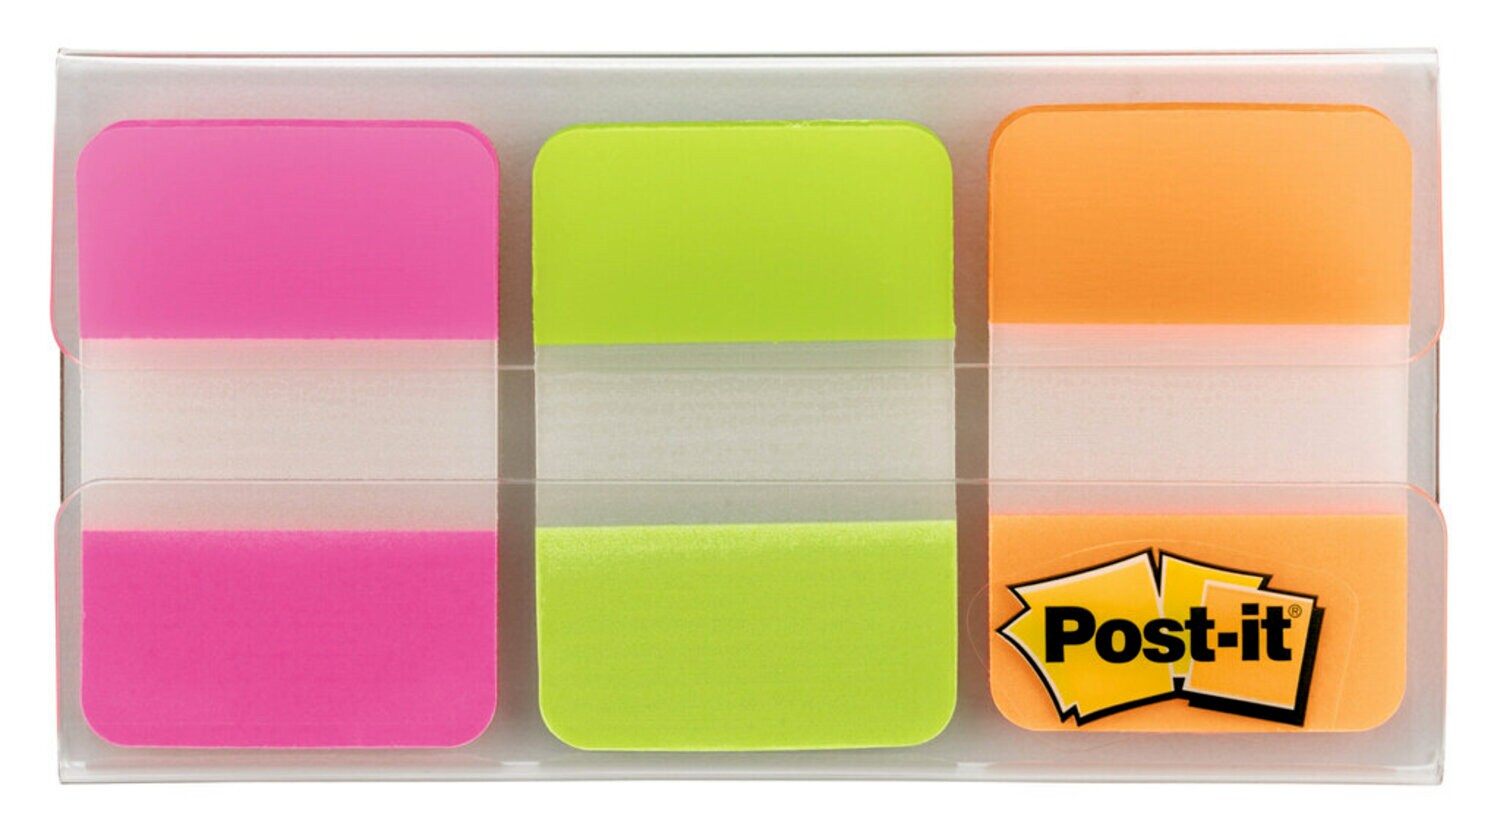 7000047885 - Post-it Divider Tabs 686-PGOT, 1 in x 1.5 in (25,4 mm x 38,1 mm)